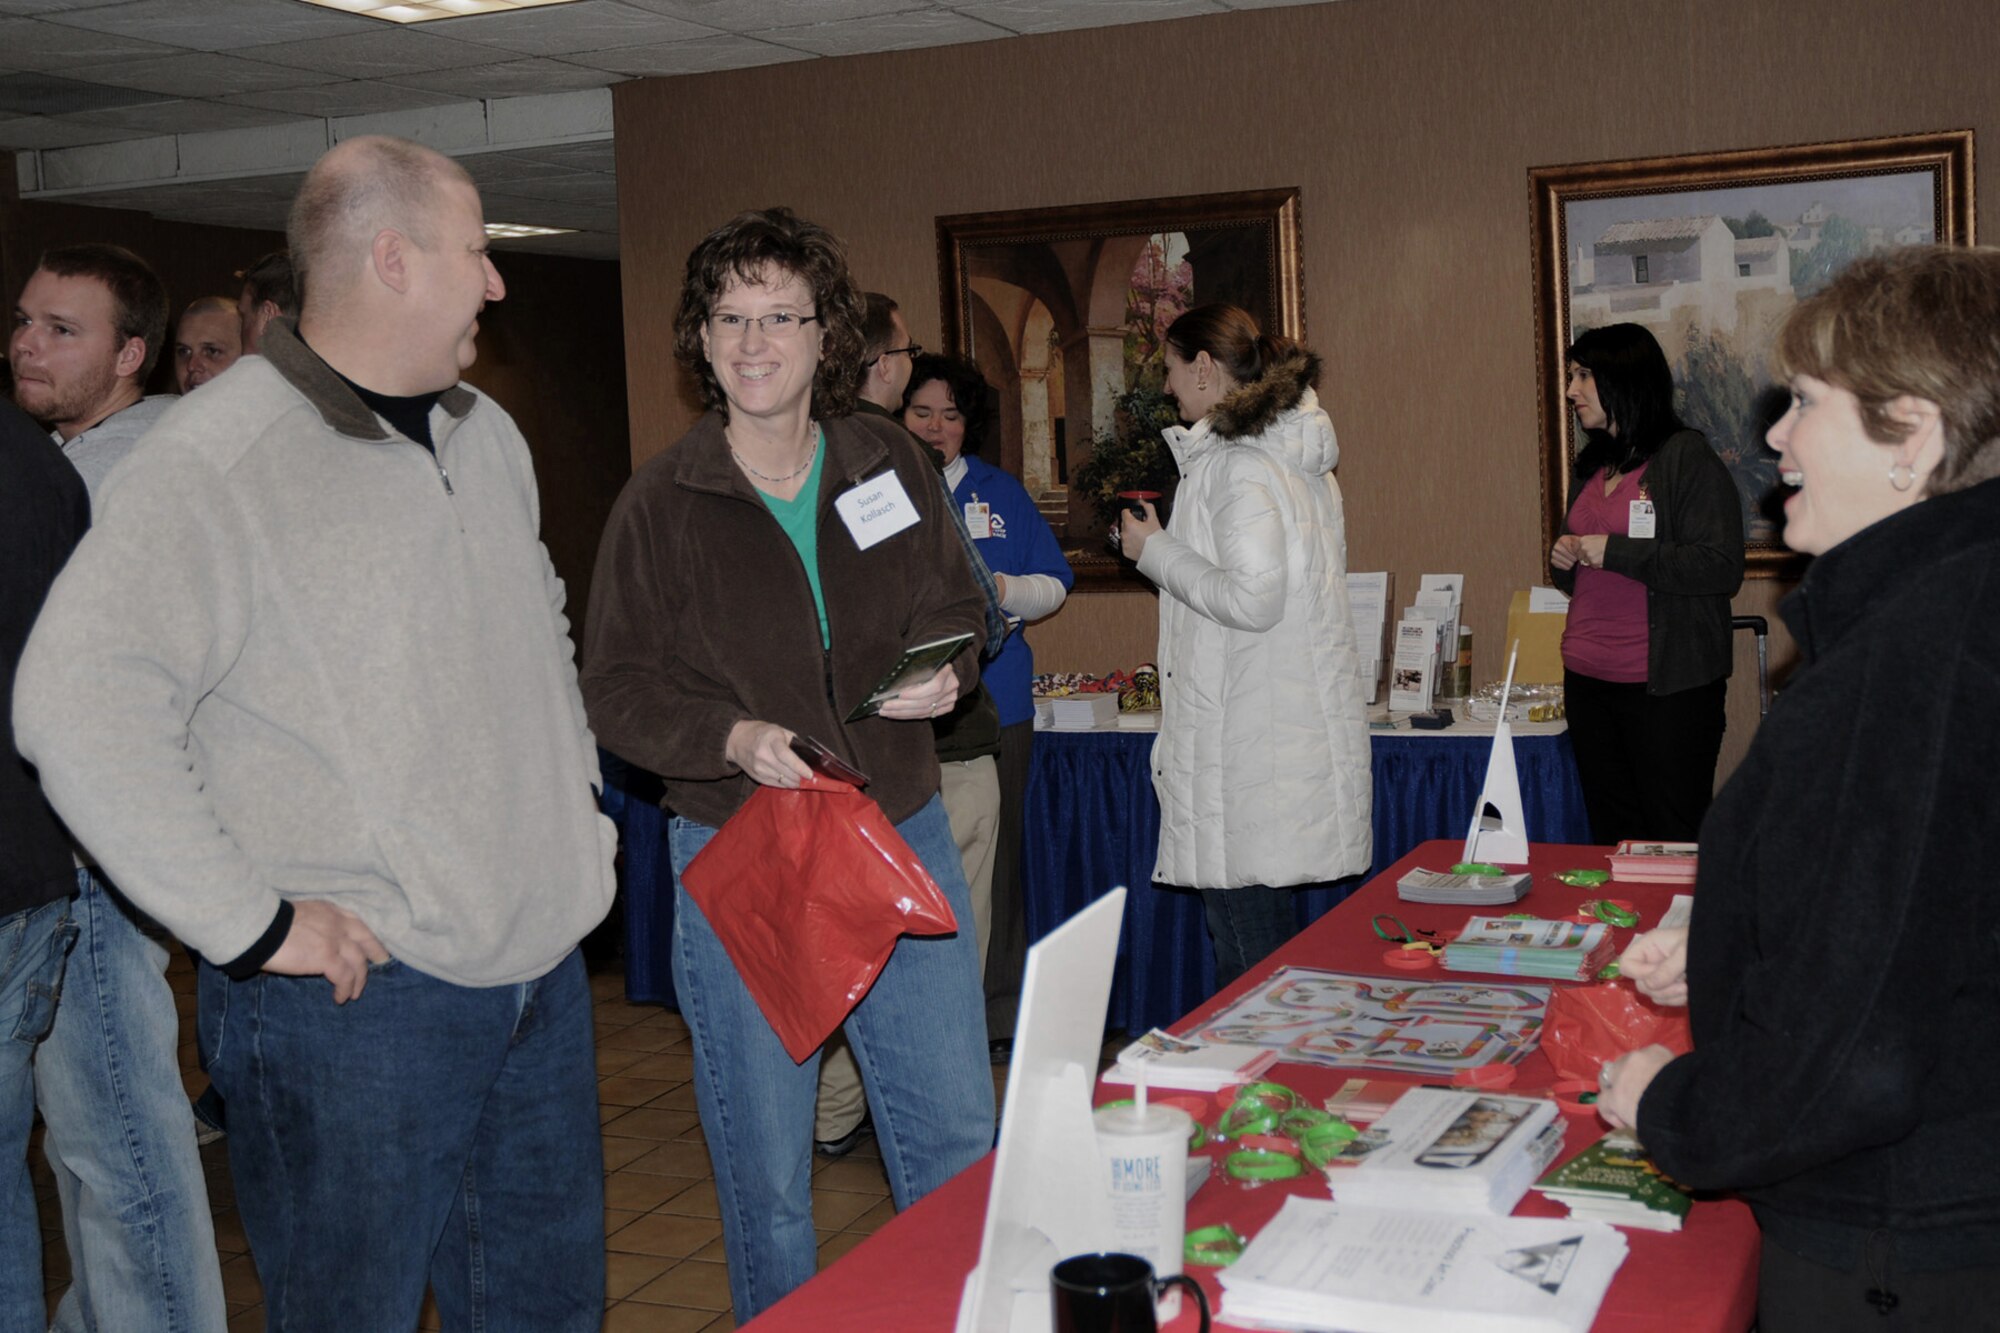 Master Sgt. Kurt Kollasch (left) and wife Susan (middle) enjoy each others company as they review information about the YMCA with representative Michelle Brainard (right) at the Yellow Ribbon Event held at the Holiday Inn Airport on March 6, 2010.  The Yellow Ribbon Event is designed to assist military members who have returned home from deployment and offer assistance to them as they transition back into civilian life.  (US Air Force photo/Staff Sgt. Linda E. Kephart)(Released) 